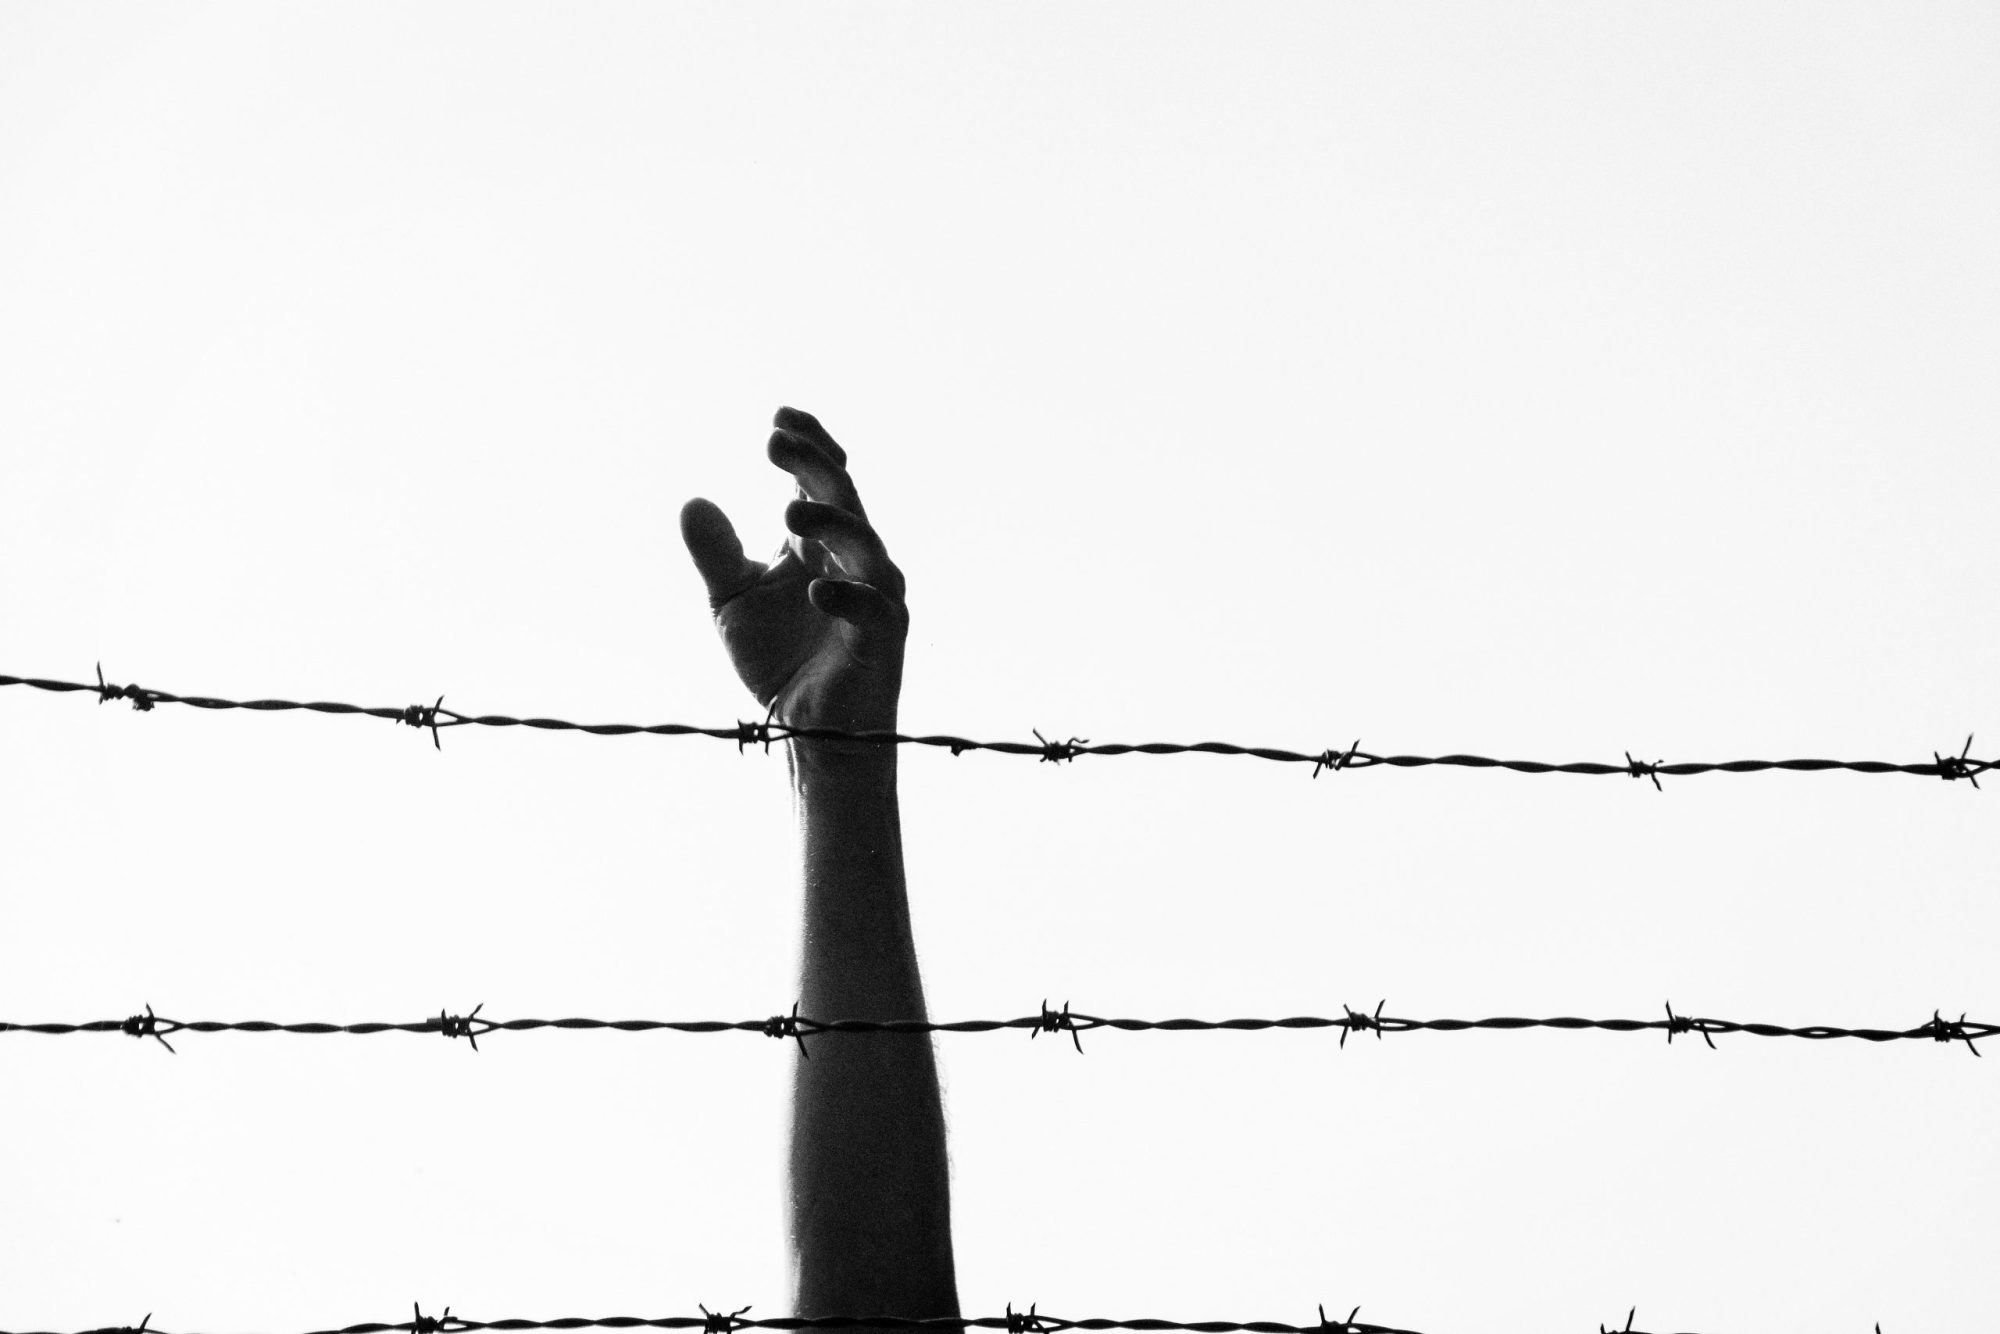 A hand reaches higher than the barbed wire in this image depicting the fight for freedom - via Getty Images